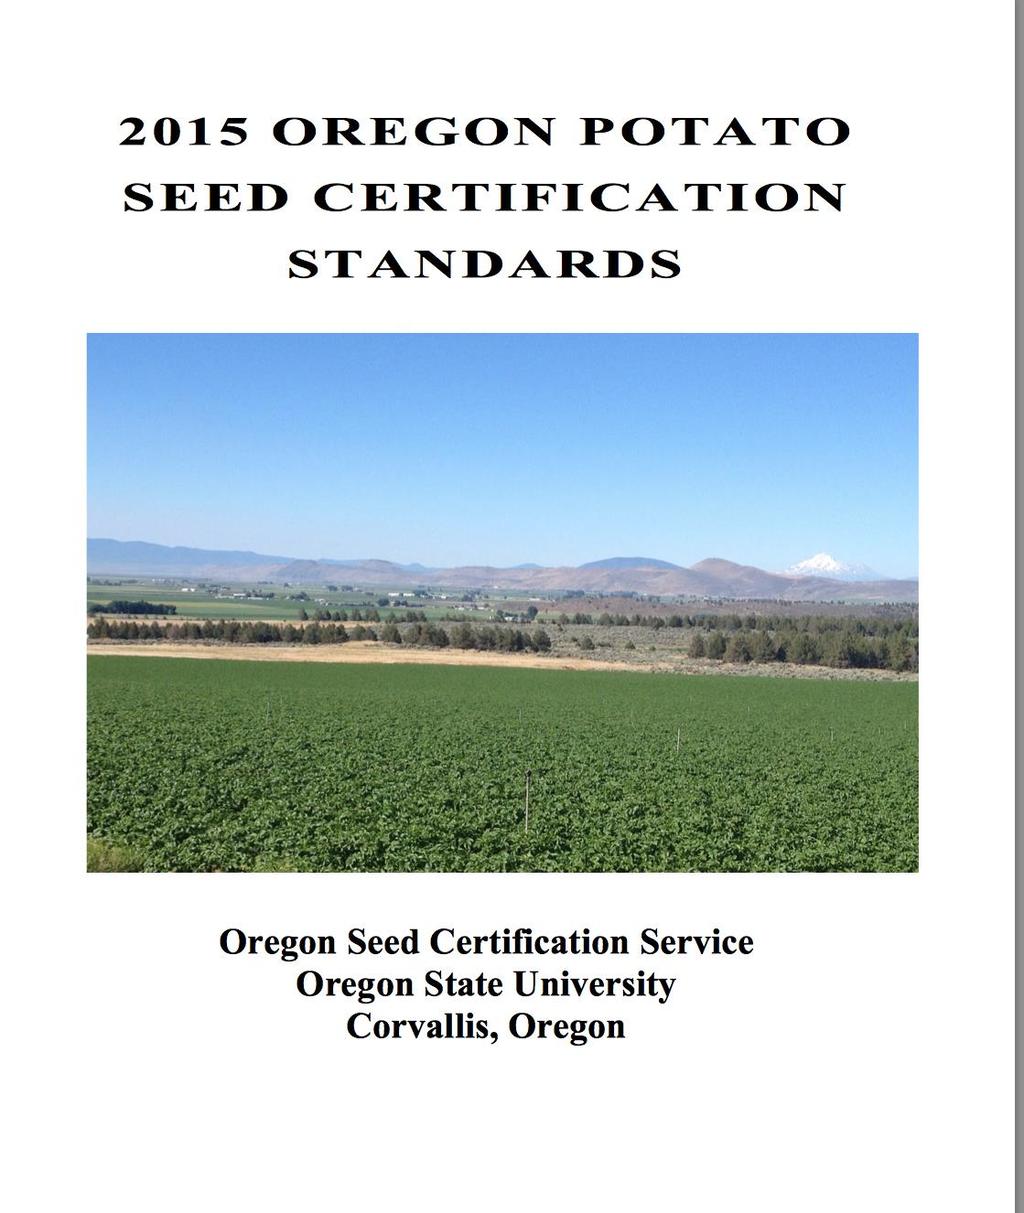 Oregon potato seed certification standards Governed by the Oregon State Board is administered through OSU Extension Service Divided into